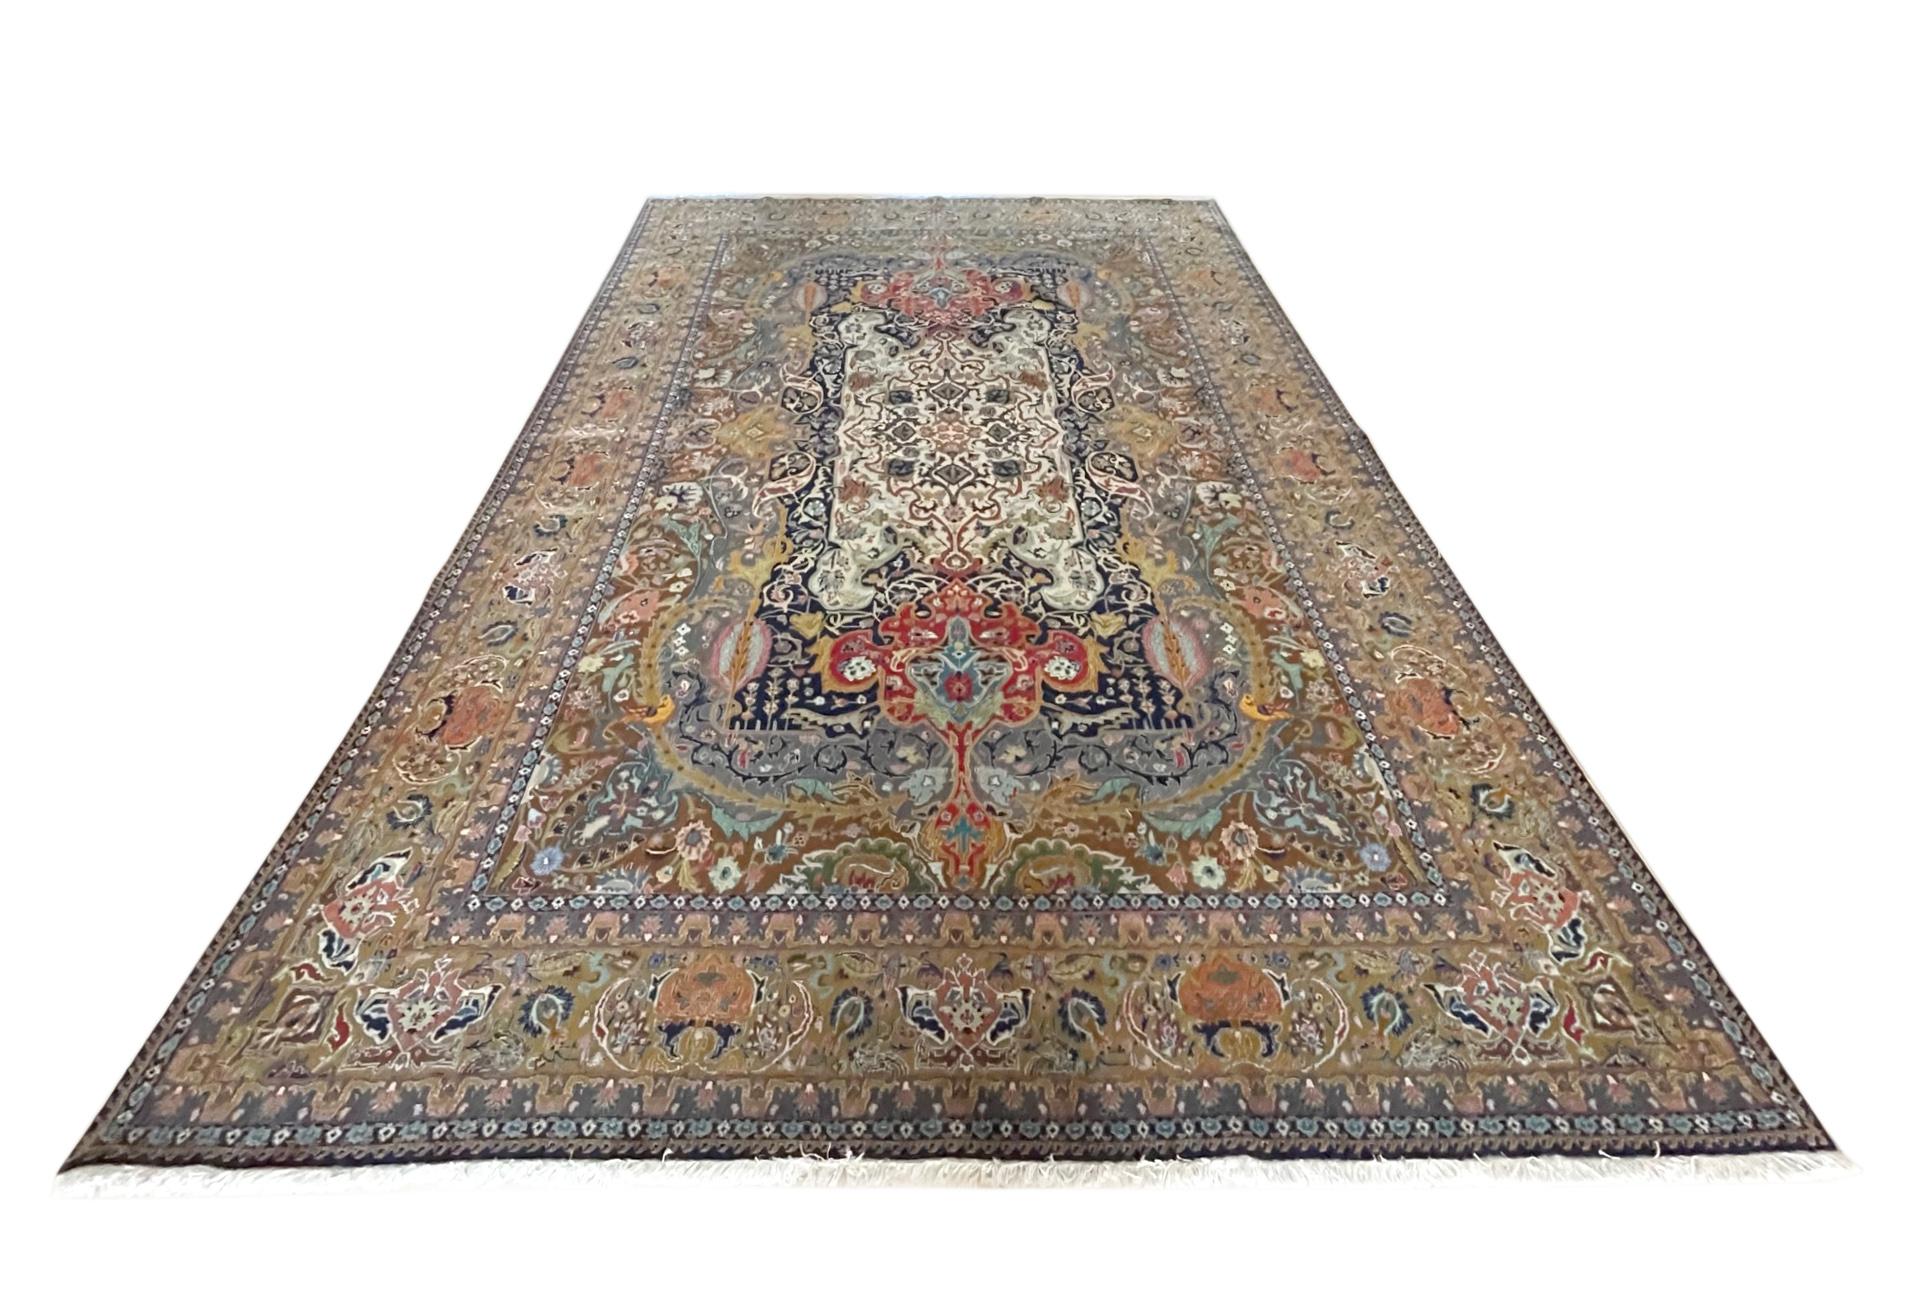 This rug is a hand knotted master piece Persian Tabriz rug with a great quality. Tabriz is one of the oldest rug weaving centers and makes a huge diversity of types of rugs. This rug features a semi medallion with stunning floral pattern with unique